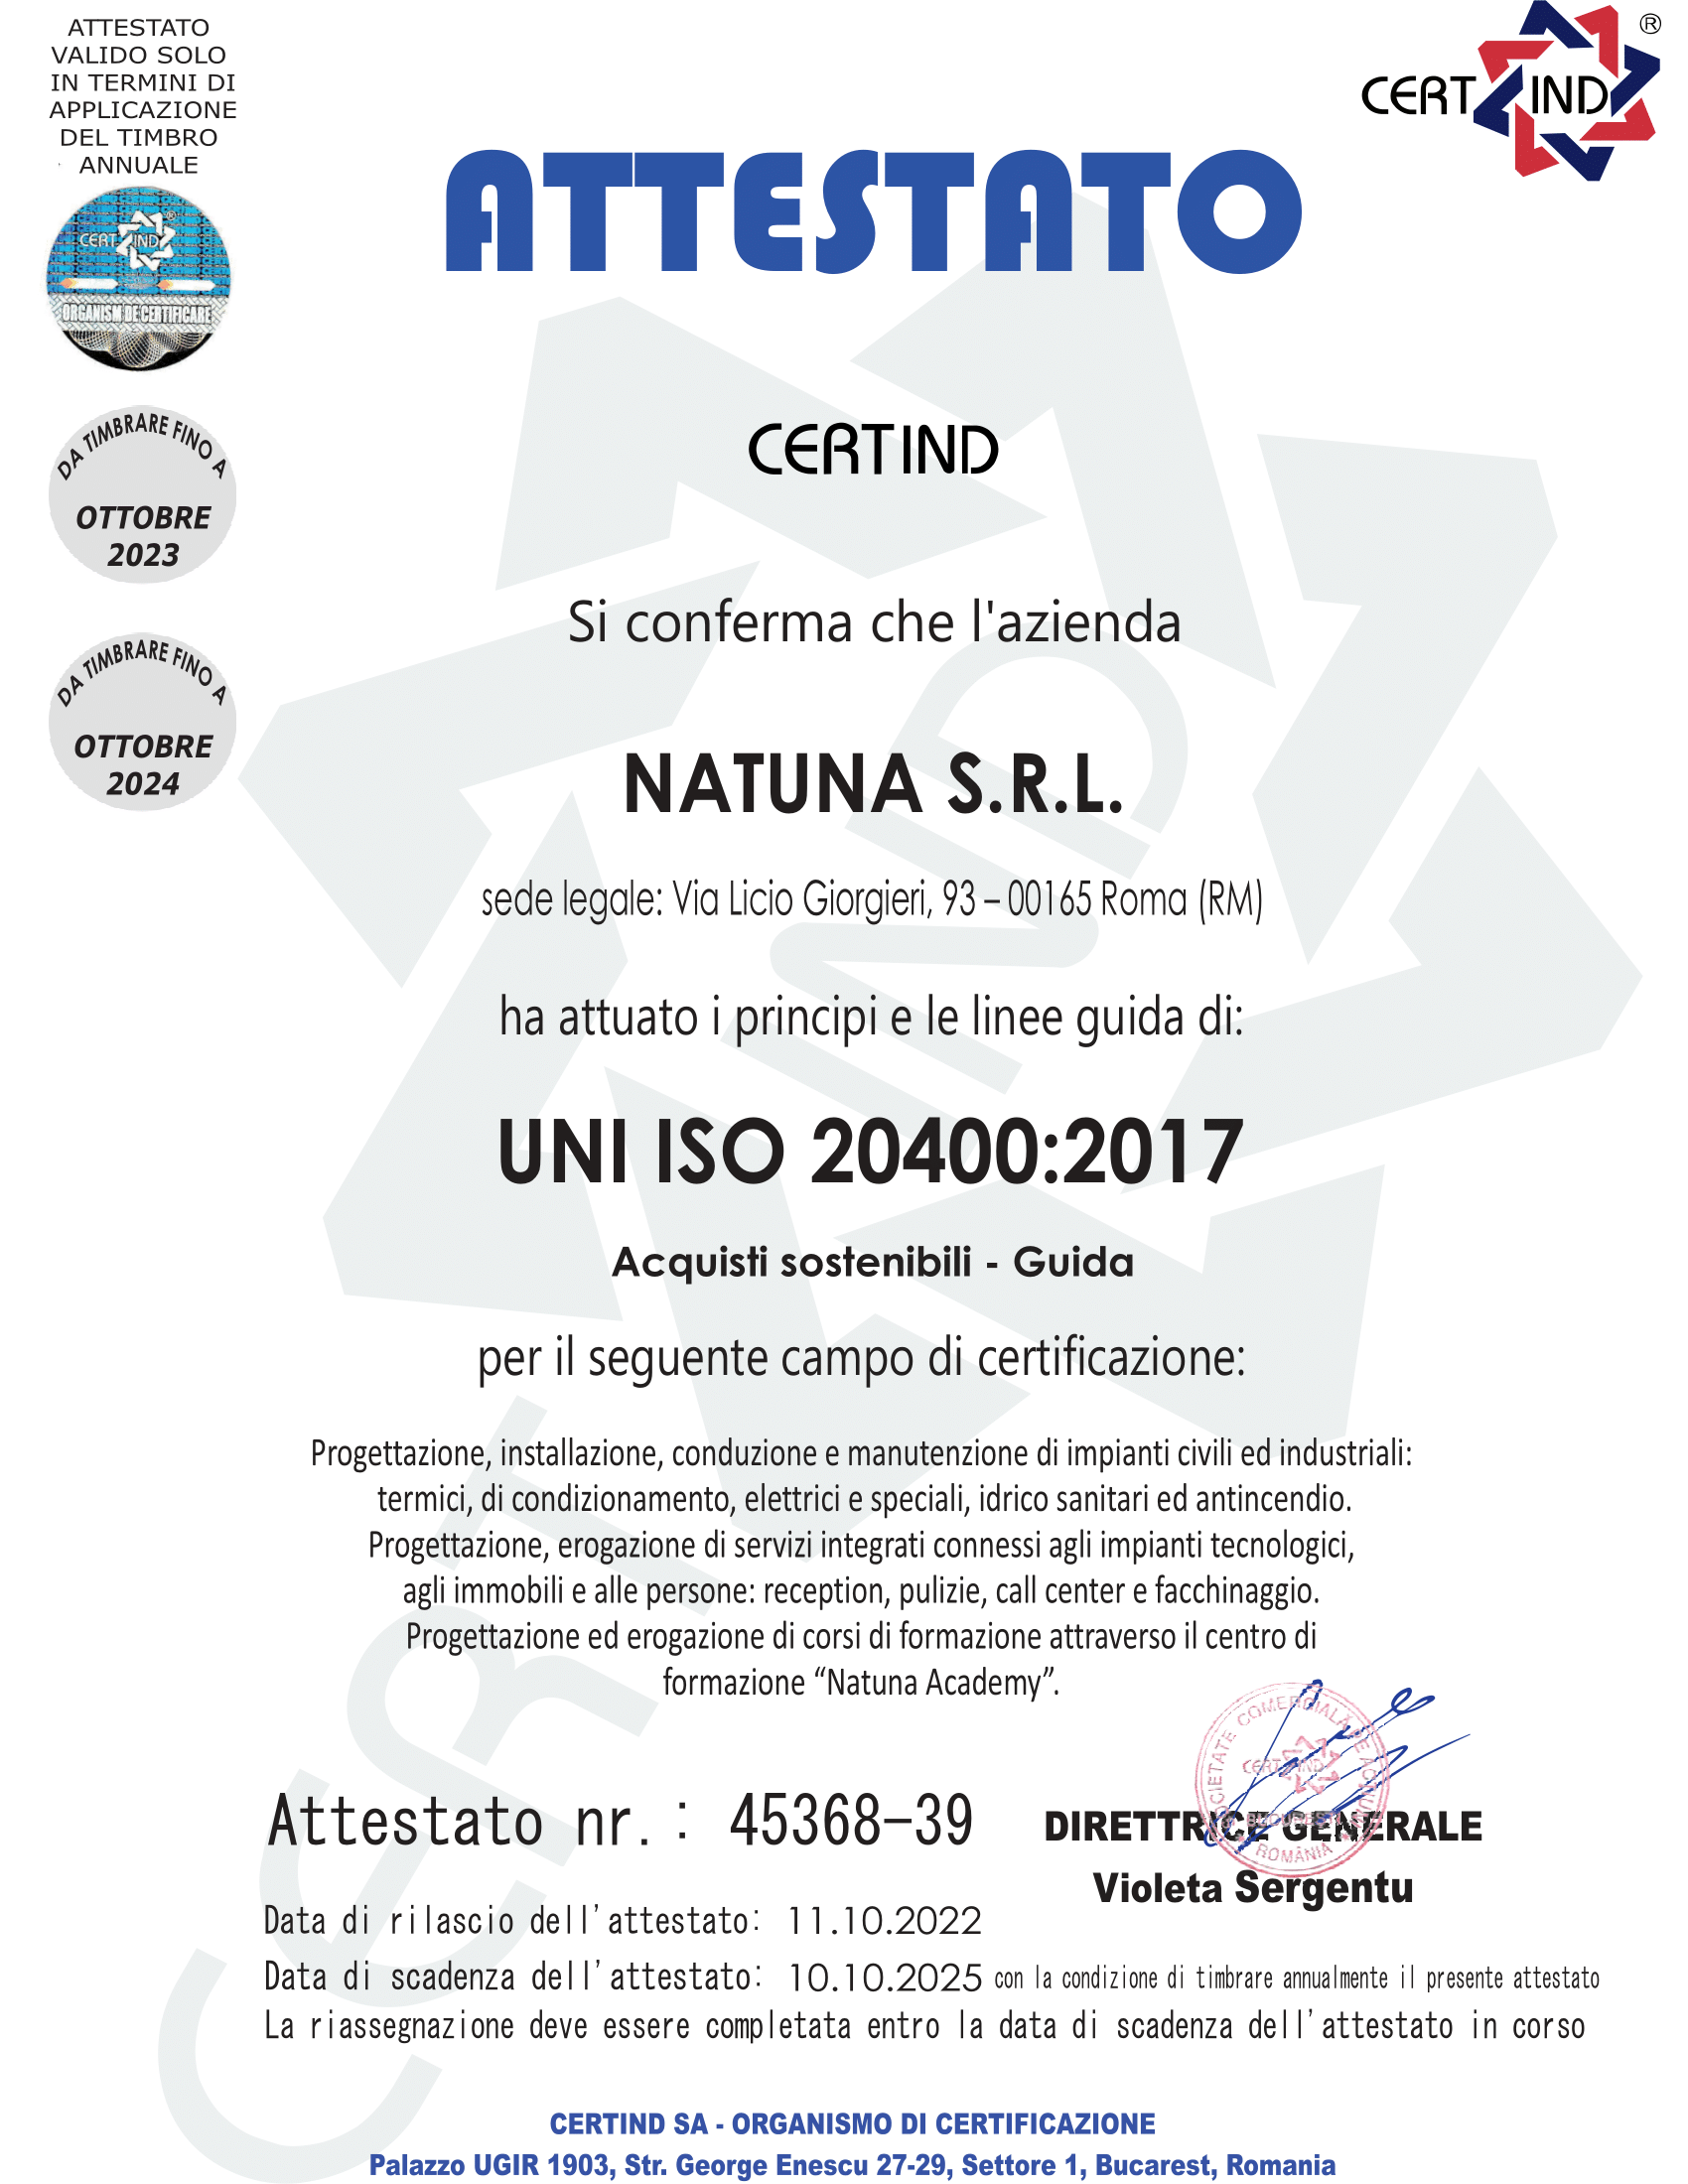 ISO 20400:2017